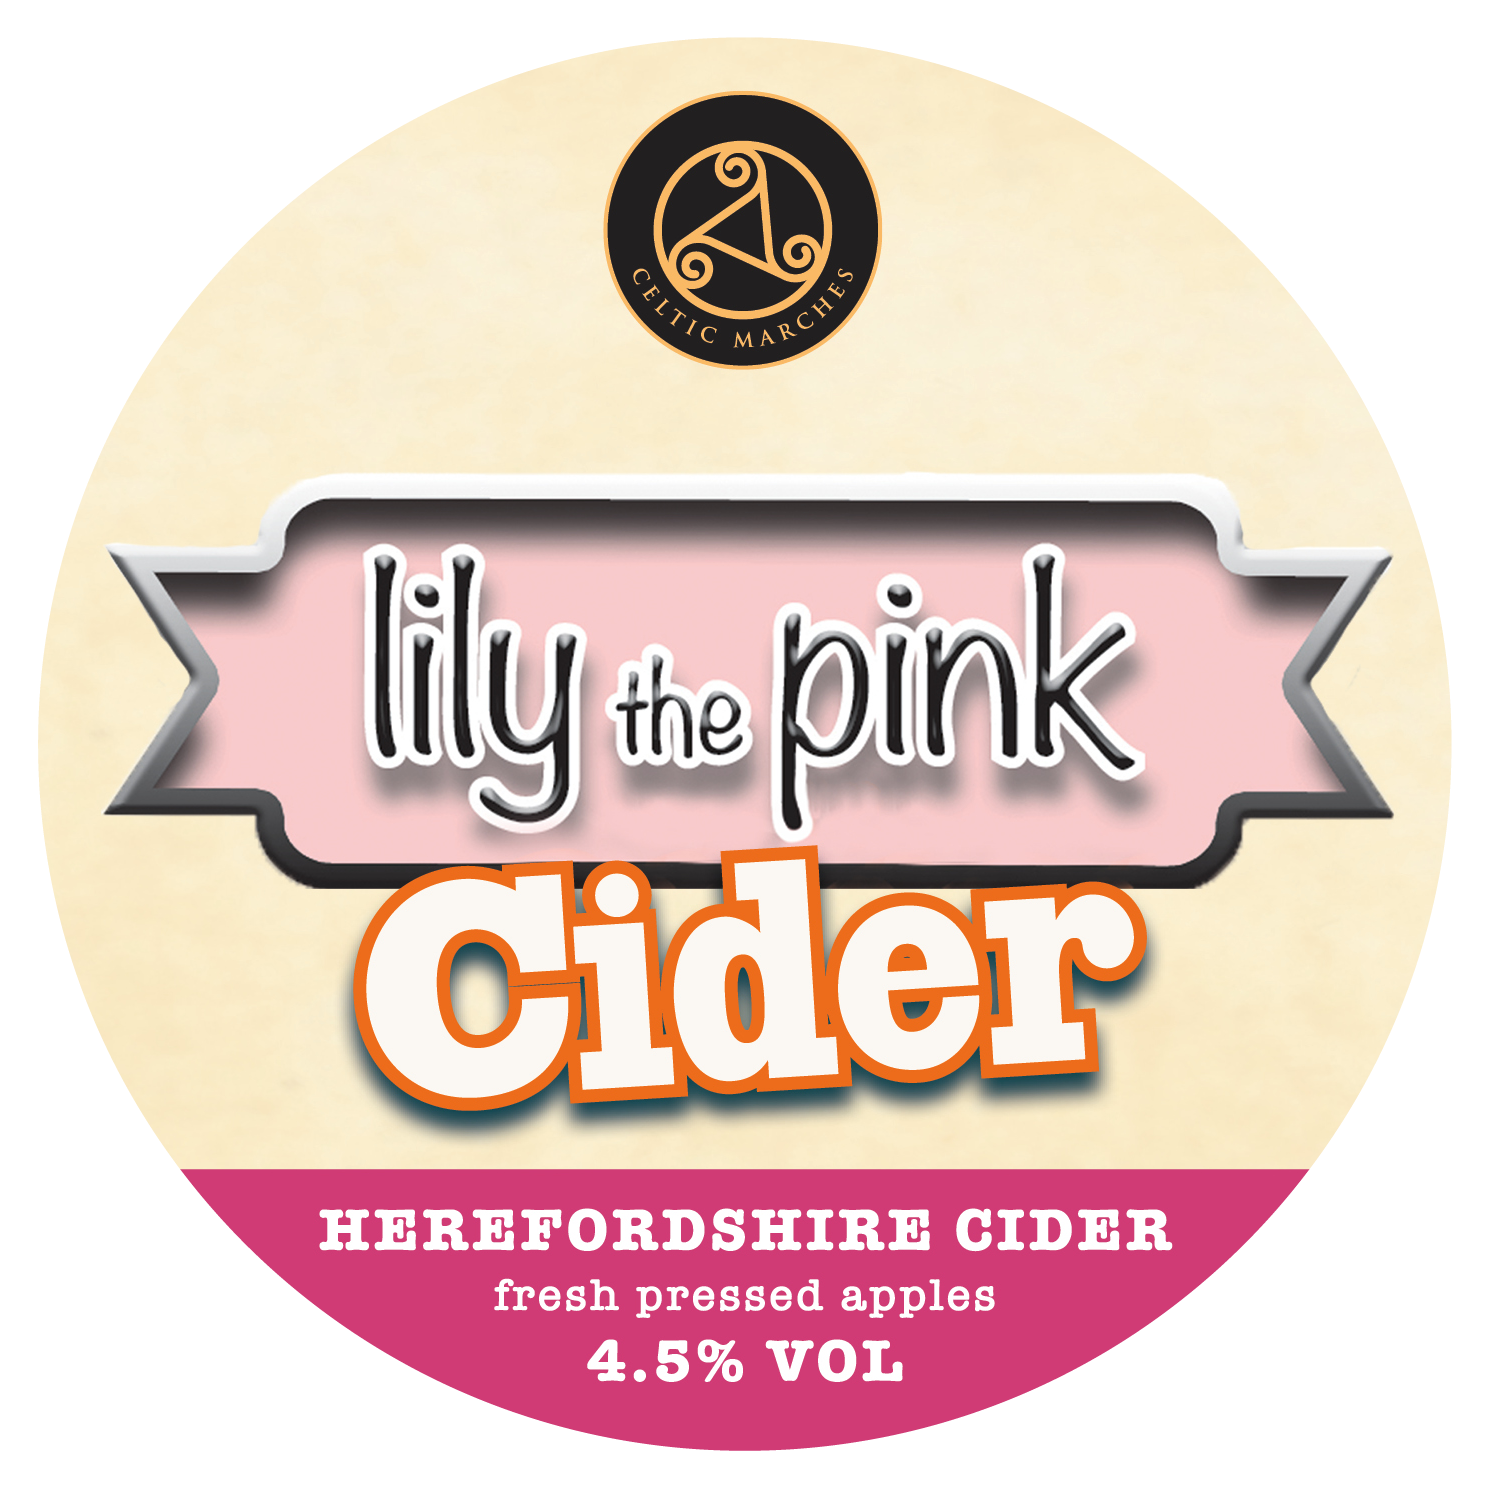 Celtic Marches Lilly The Pink 20Ltr Bag In Box Hazy 4.5%